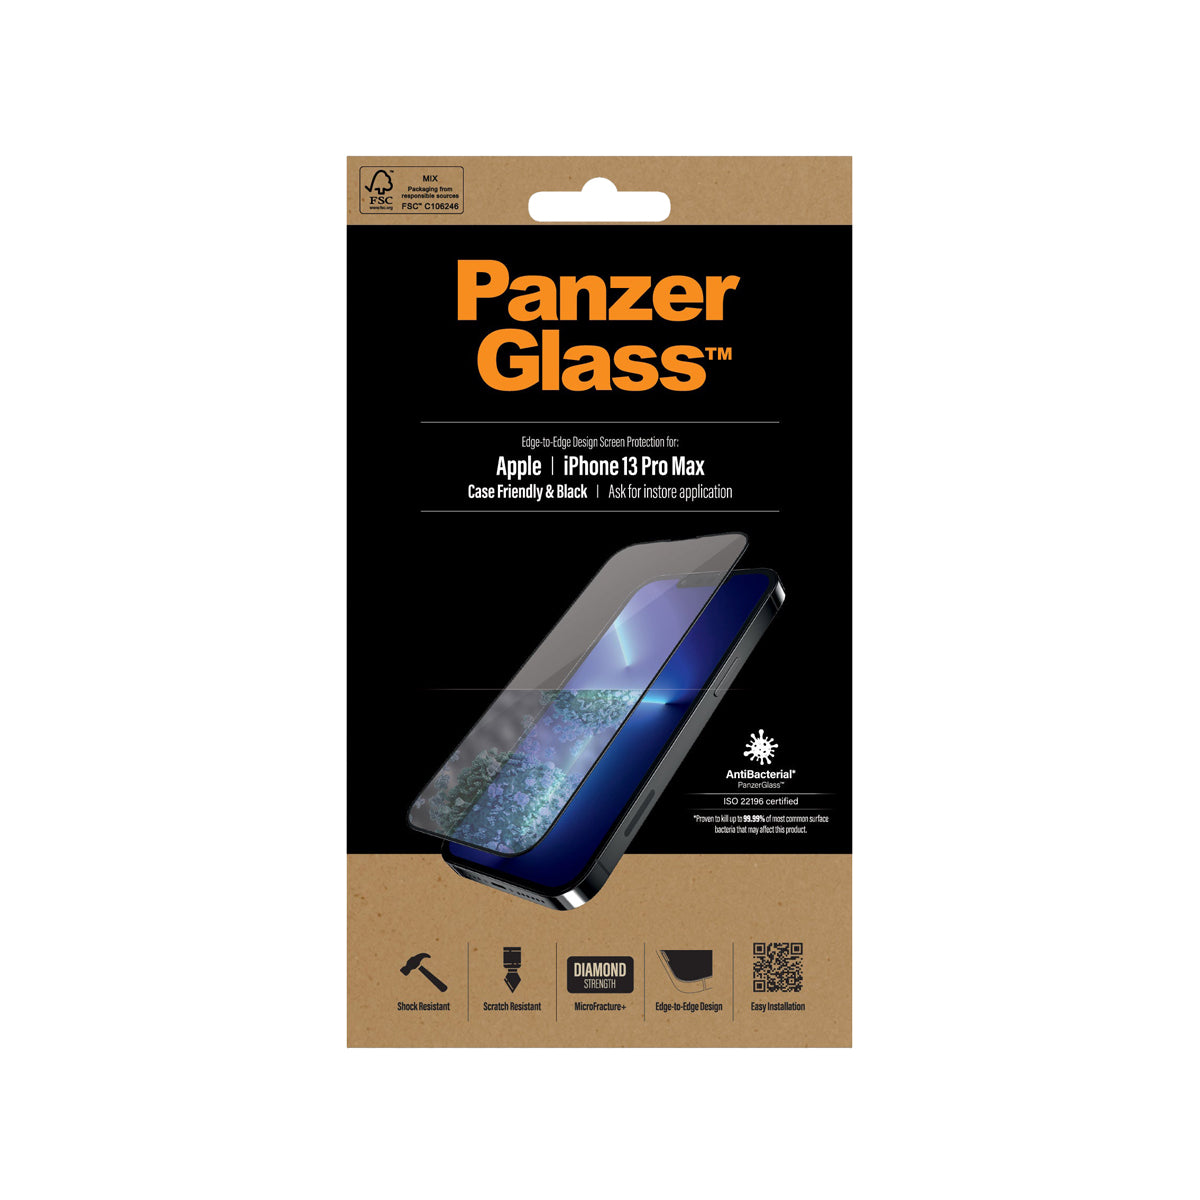 PanzerGlass CaseFriendly Black Phone Screen Protector for iPhone 13 Pro Max - Clear.